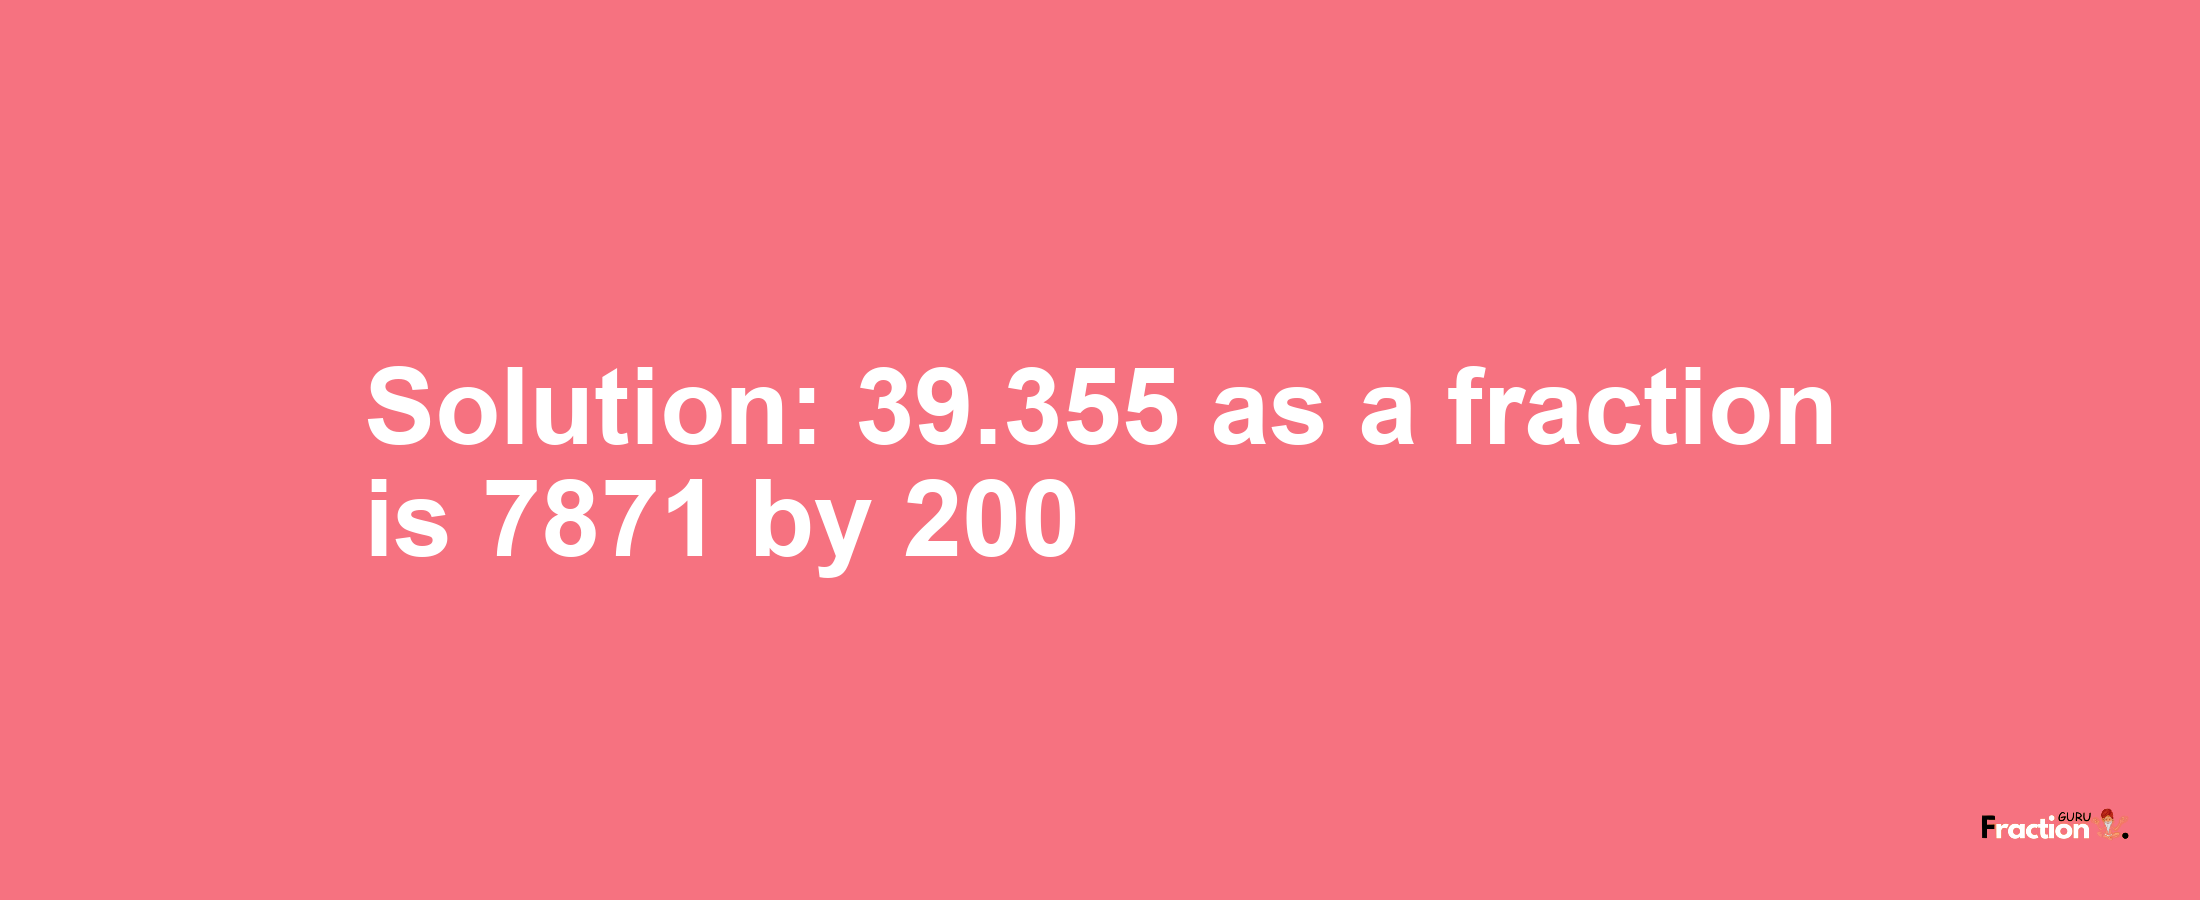 Solution:39.355 as a fraction is 7871/200